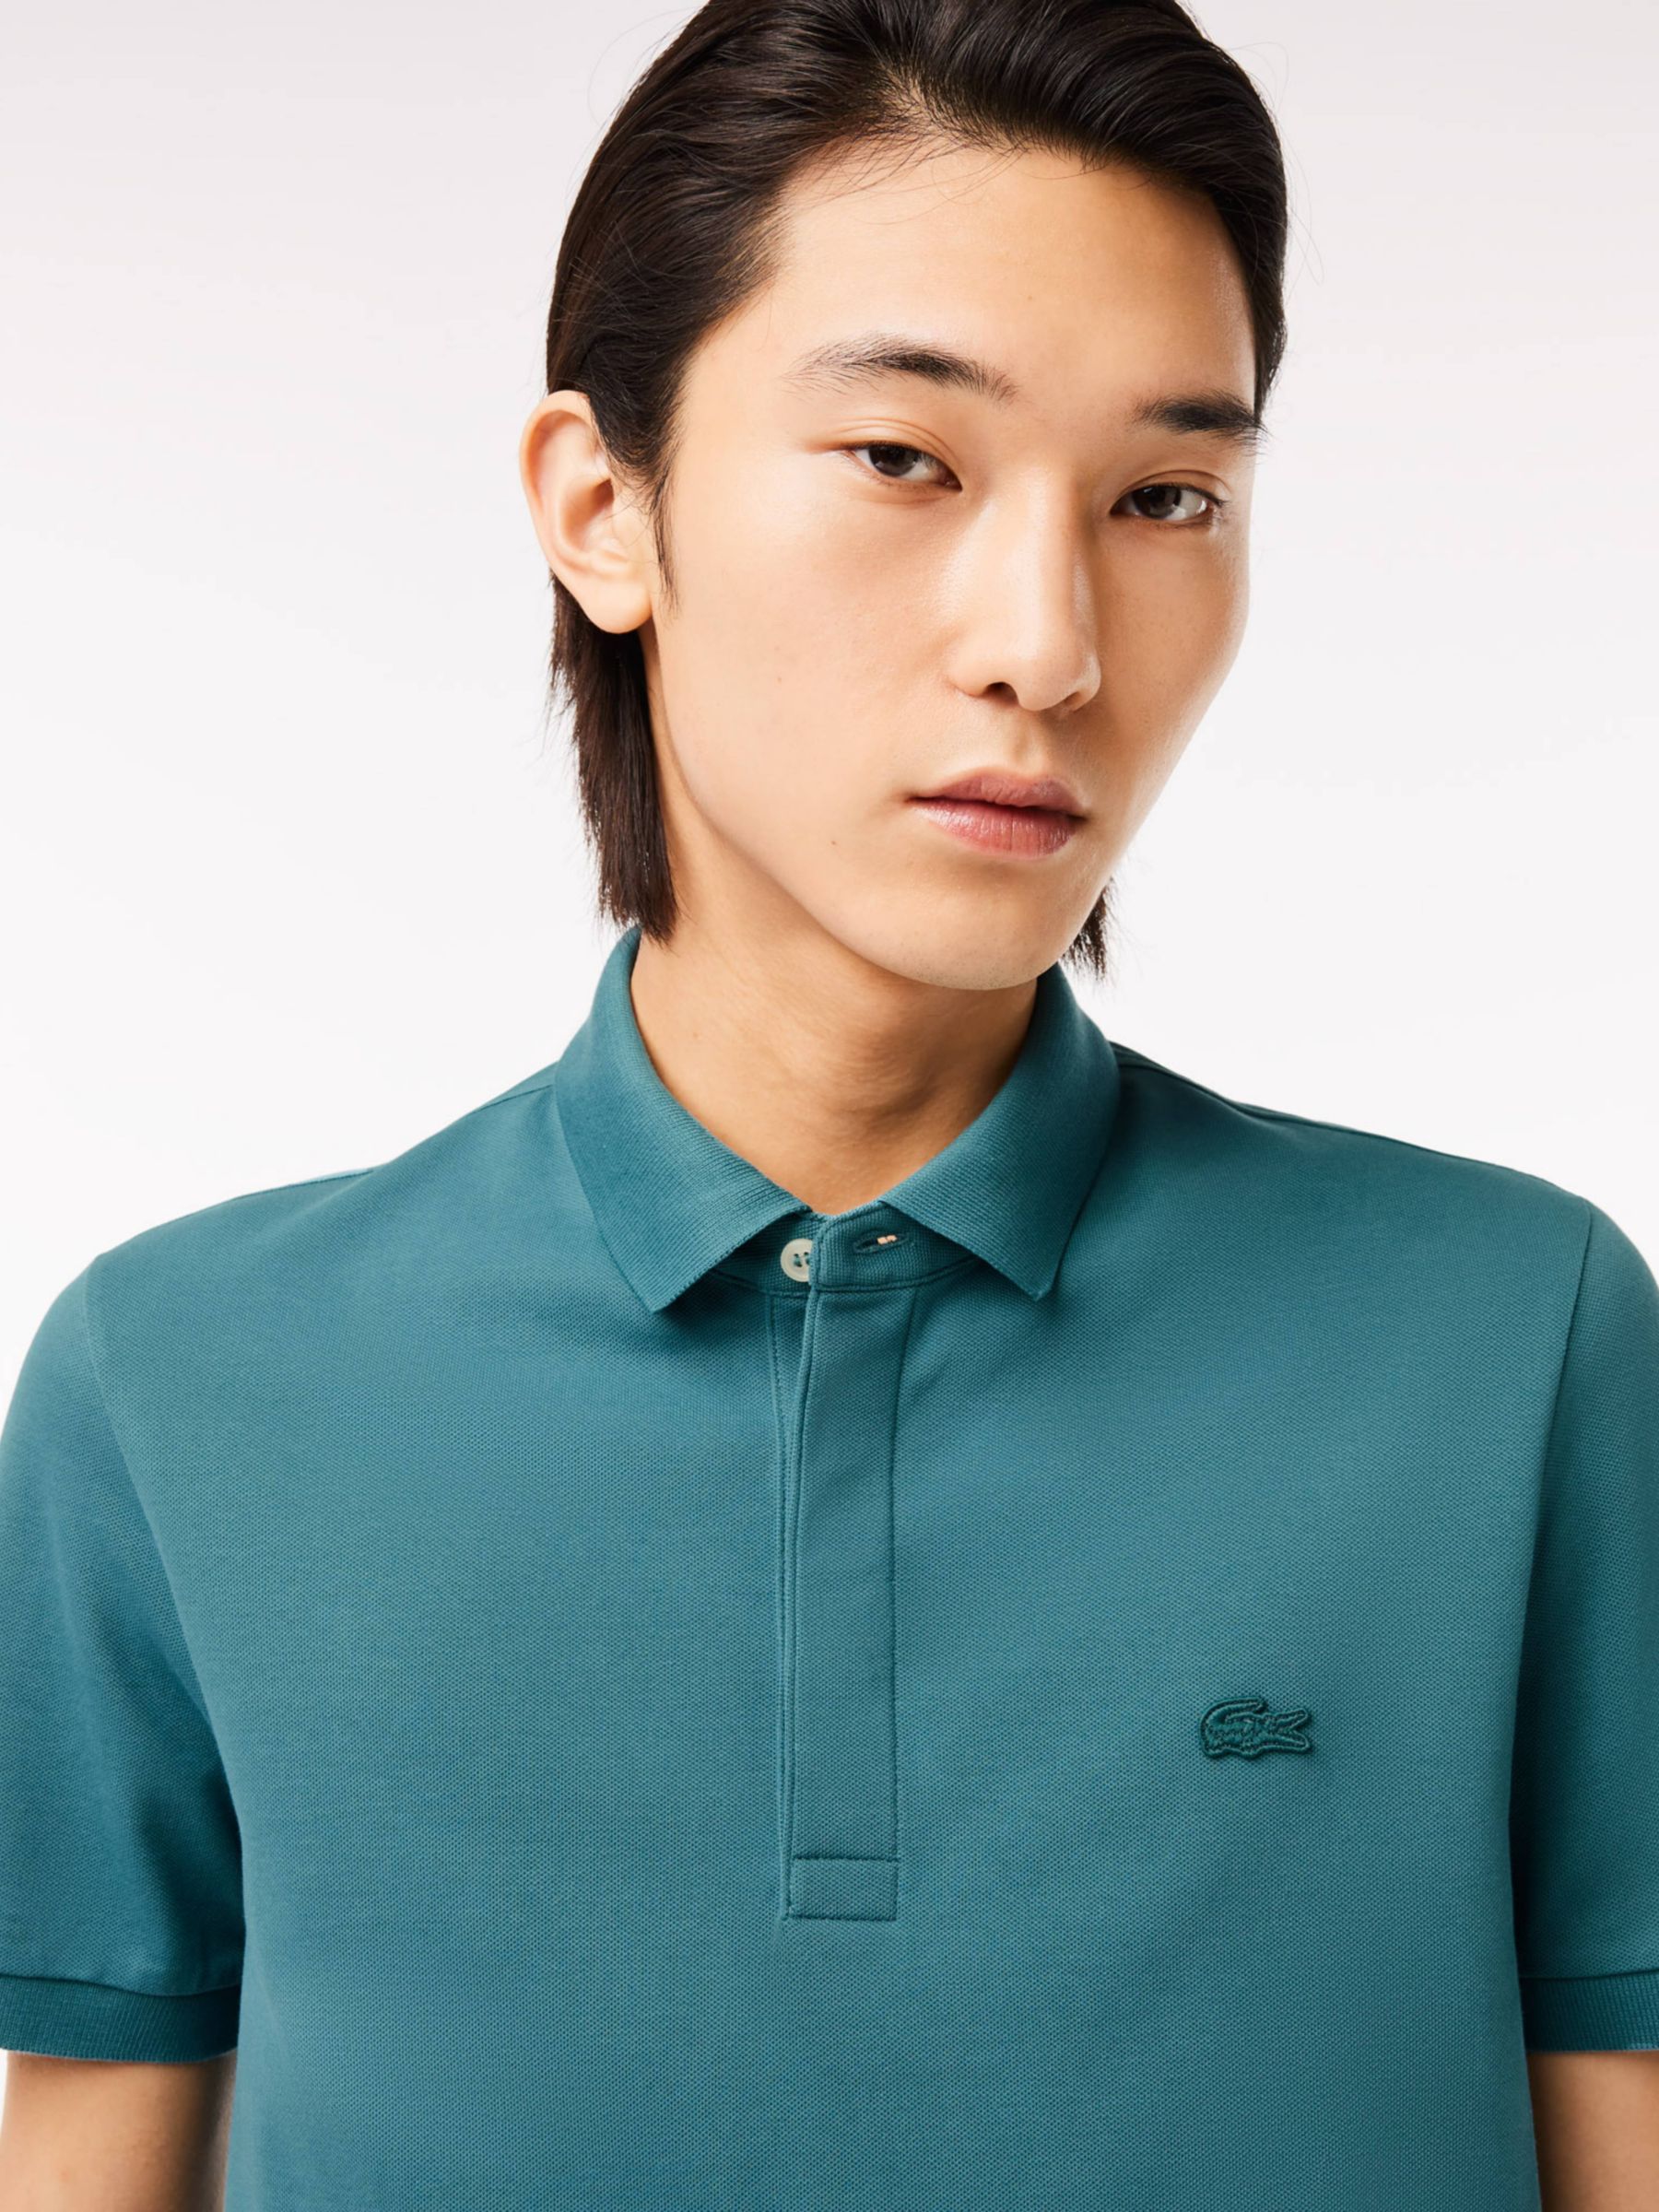 Lacoste Core Essential Polo Shirt, Green, S